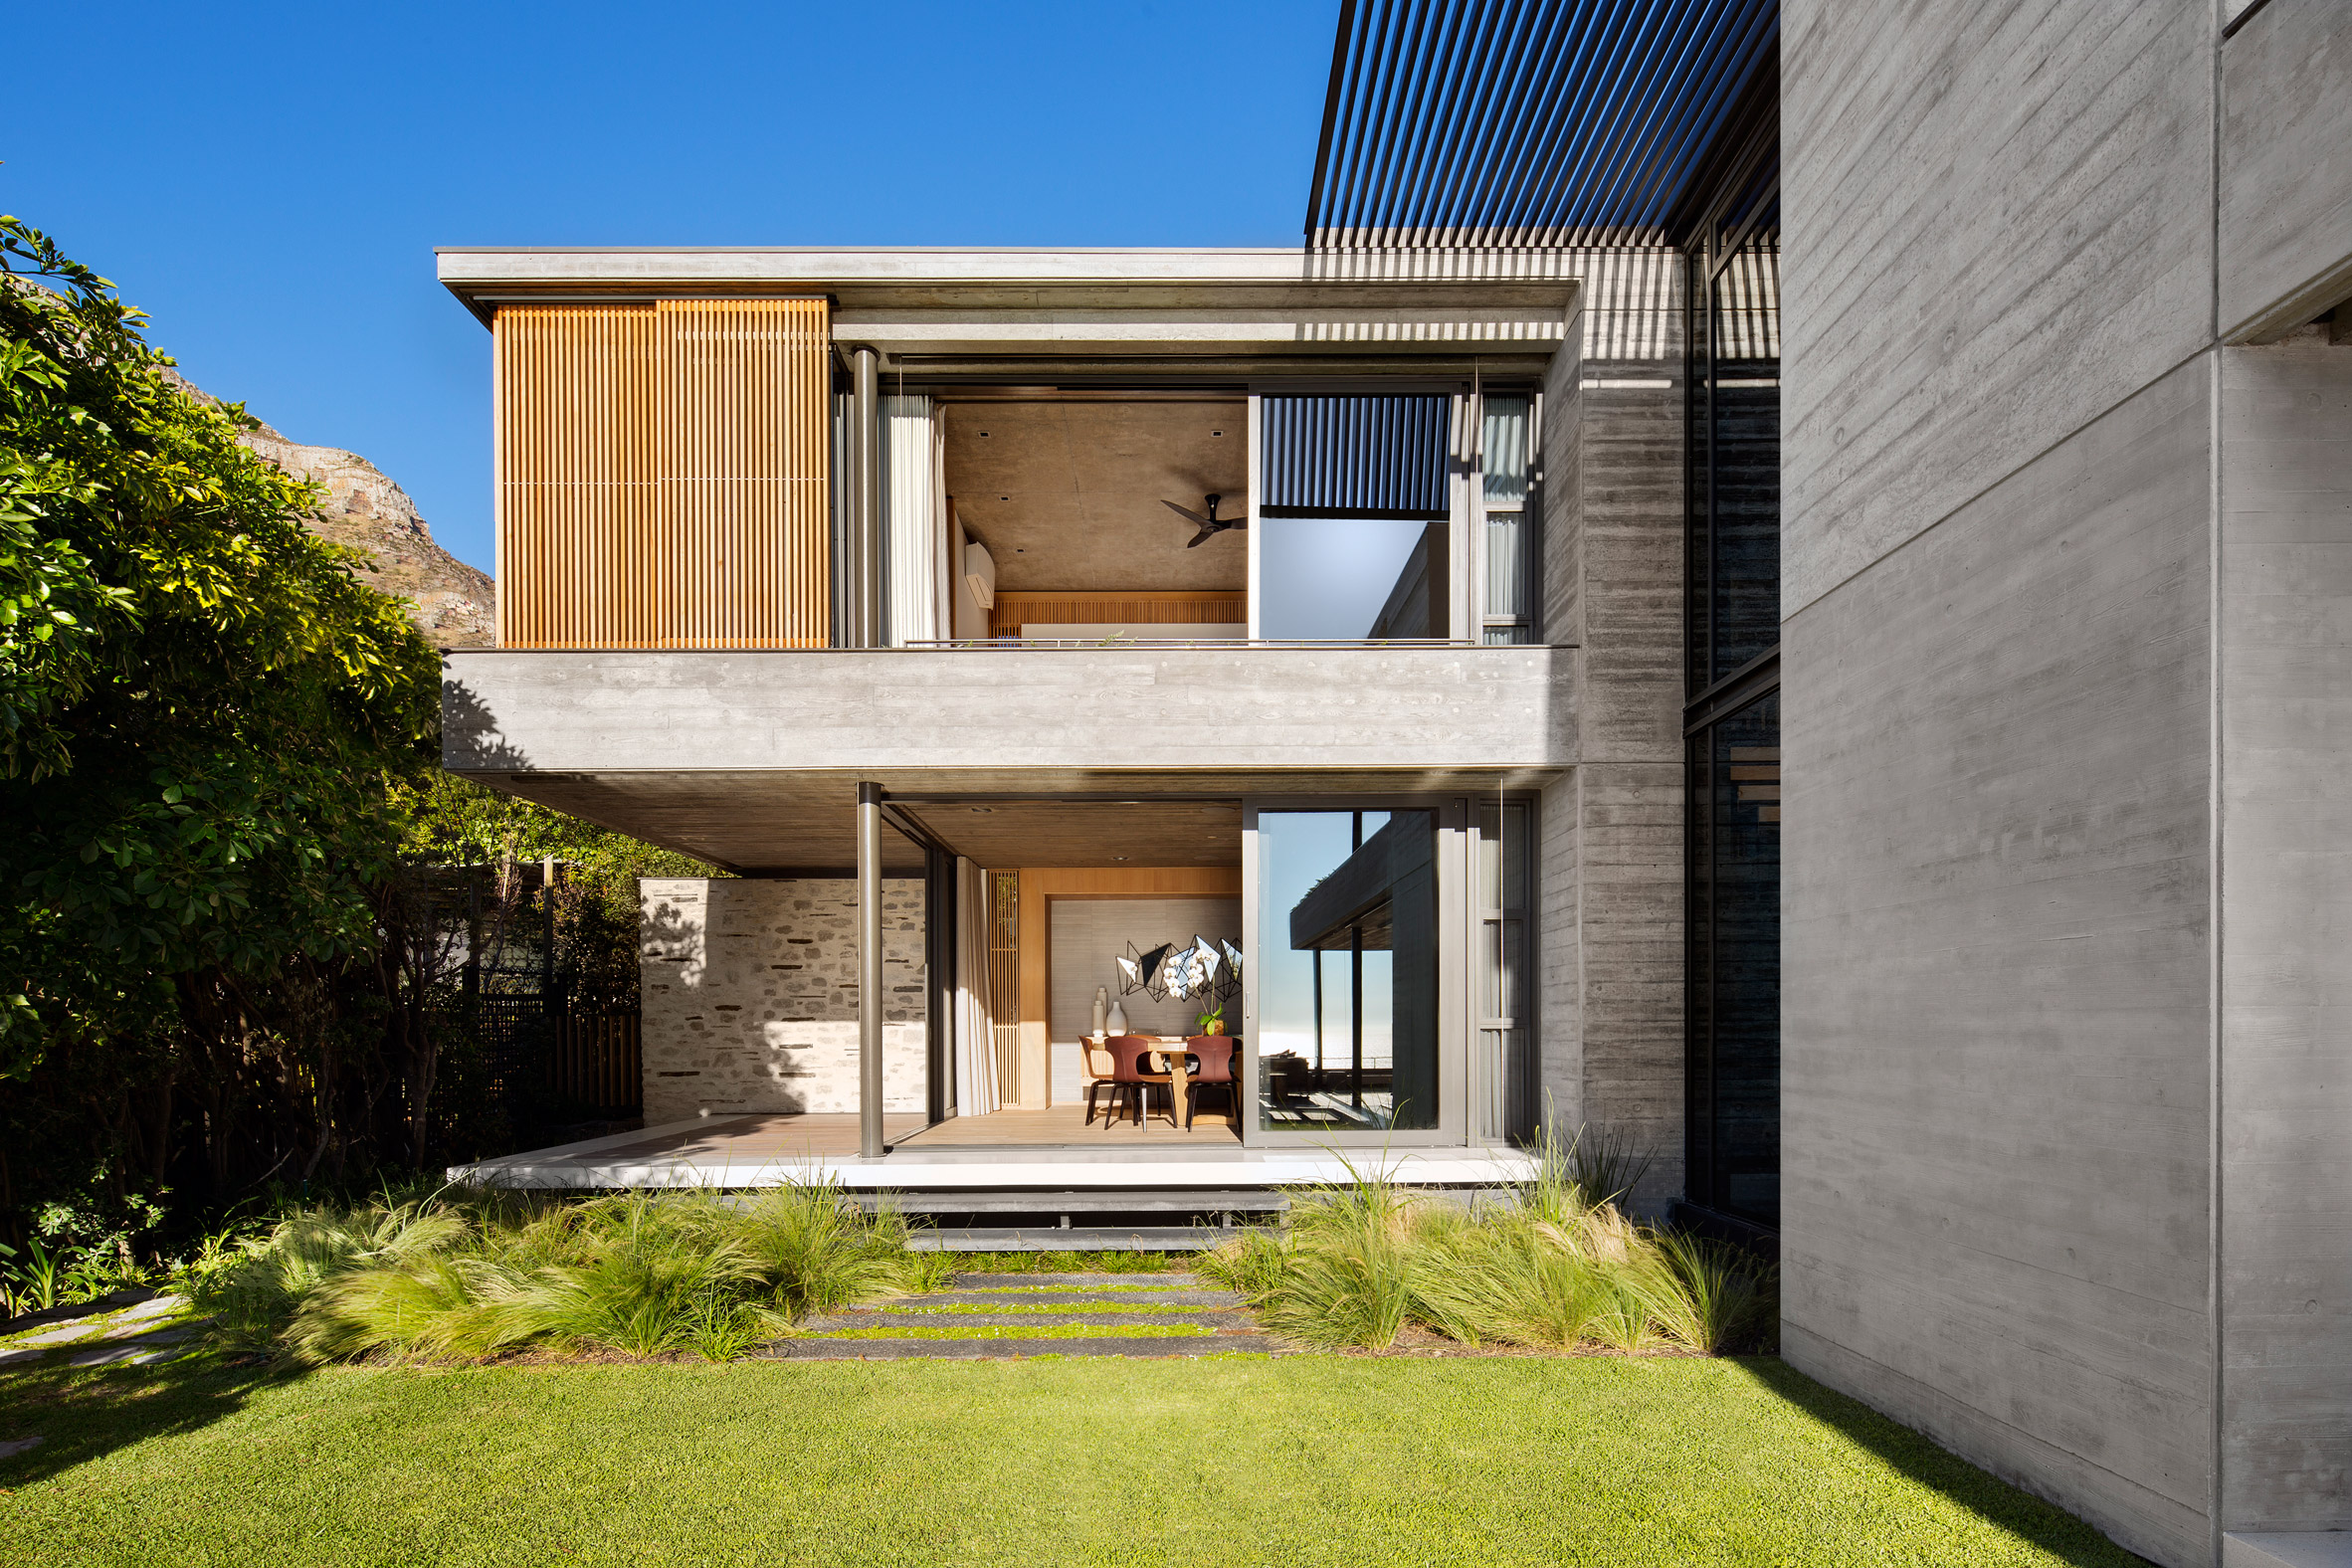 Local architecture firm Malan Vorster designs seaside Clifton House in Cape Town